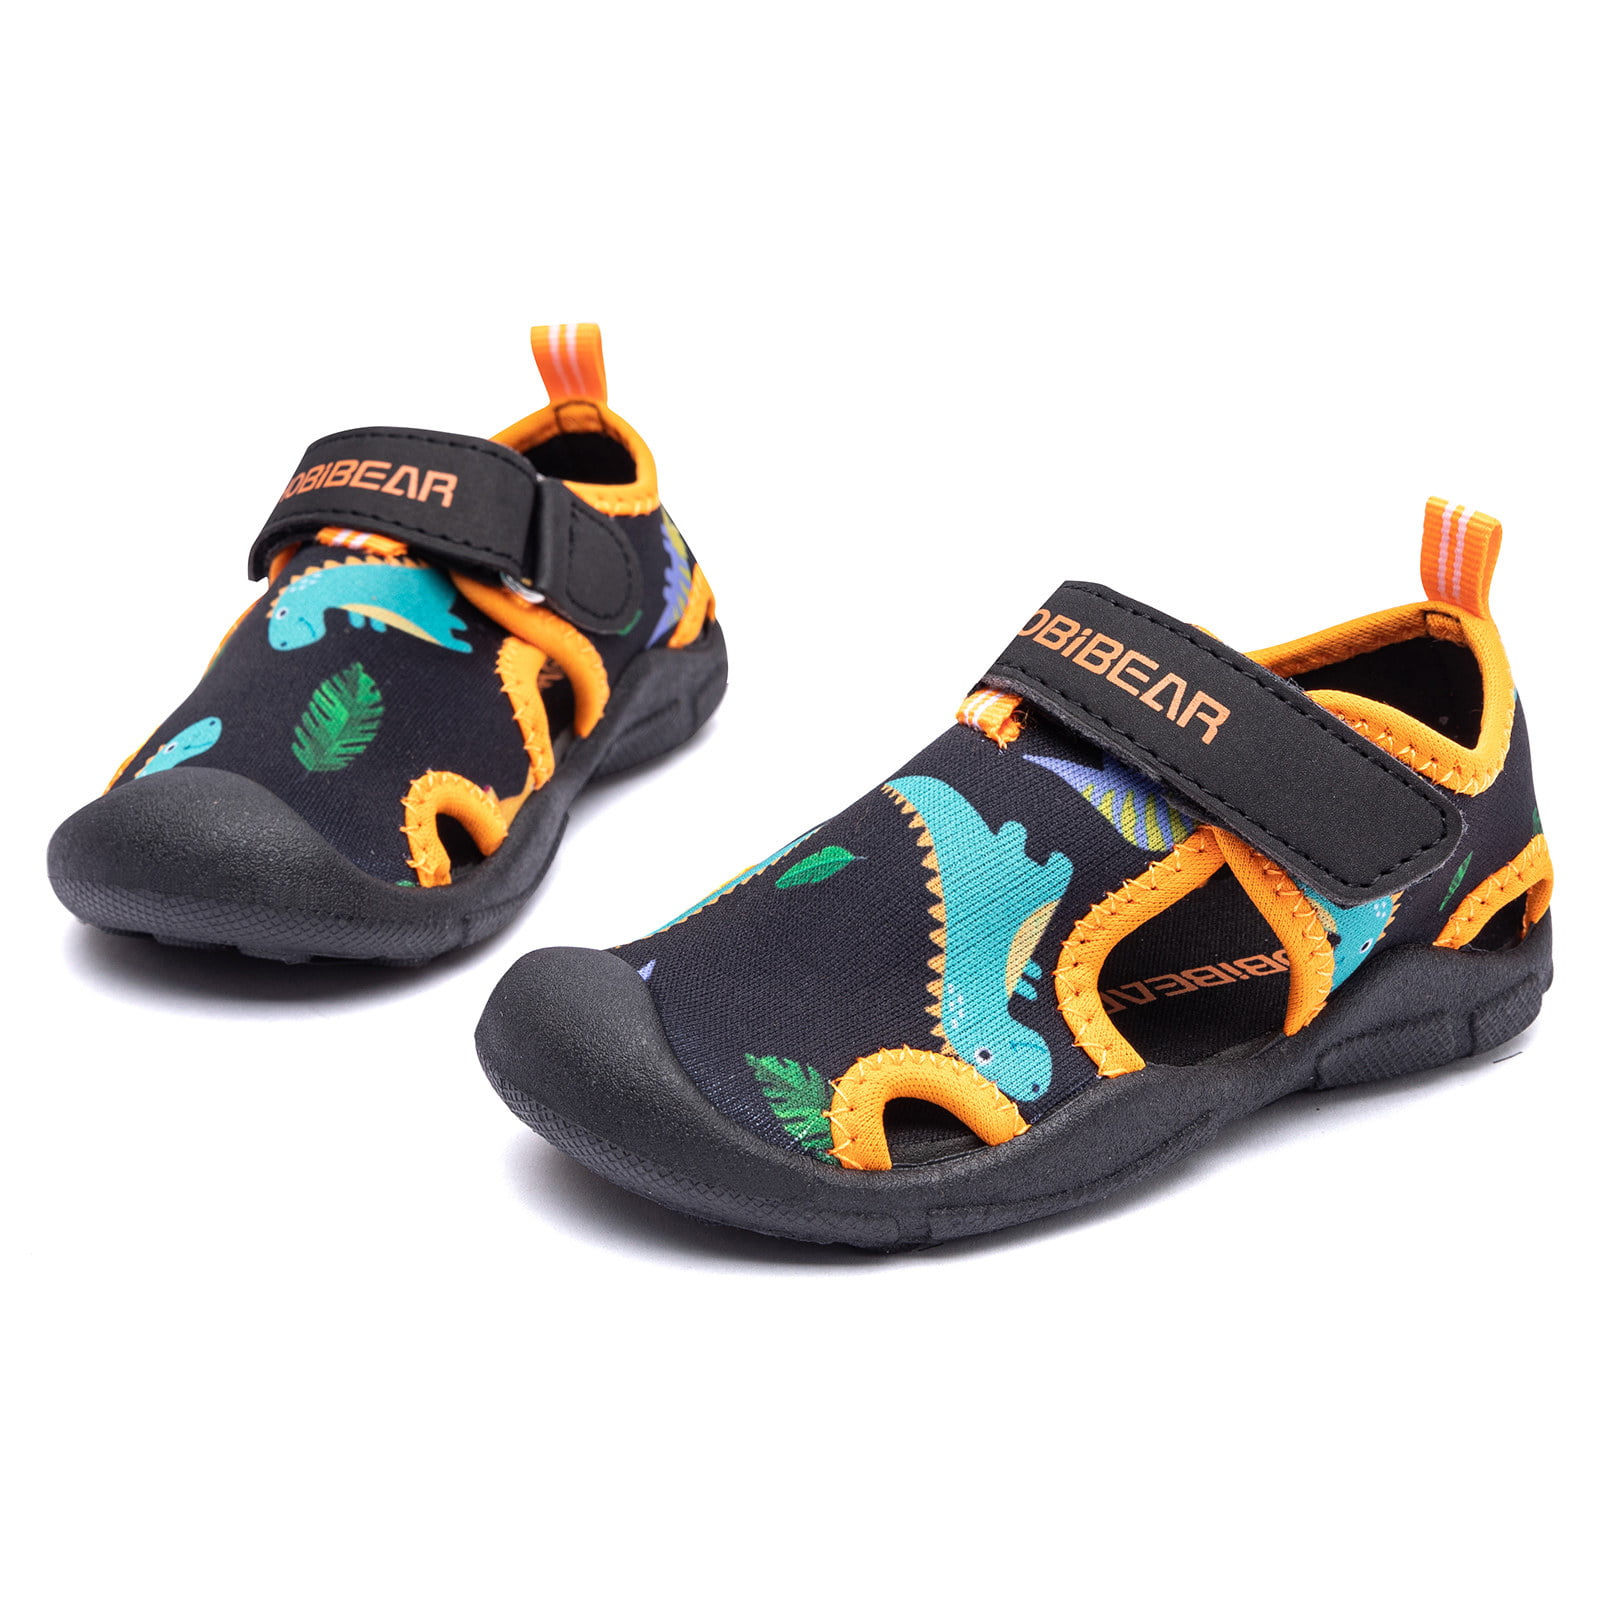 Kids Boys Toddler Sport Water Camouflage Sandals Closed-Toe Outdoor Casual Shoes 